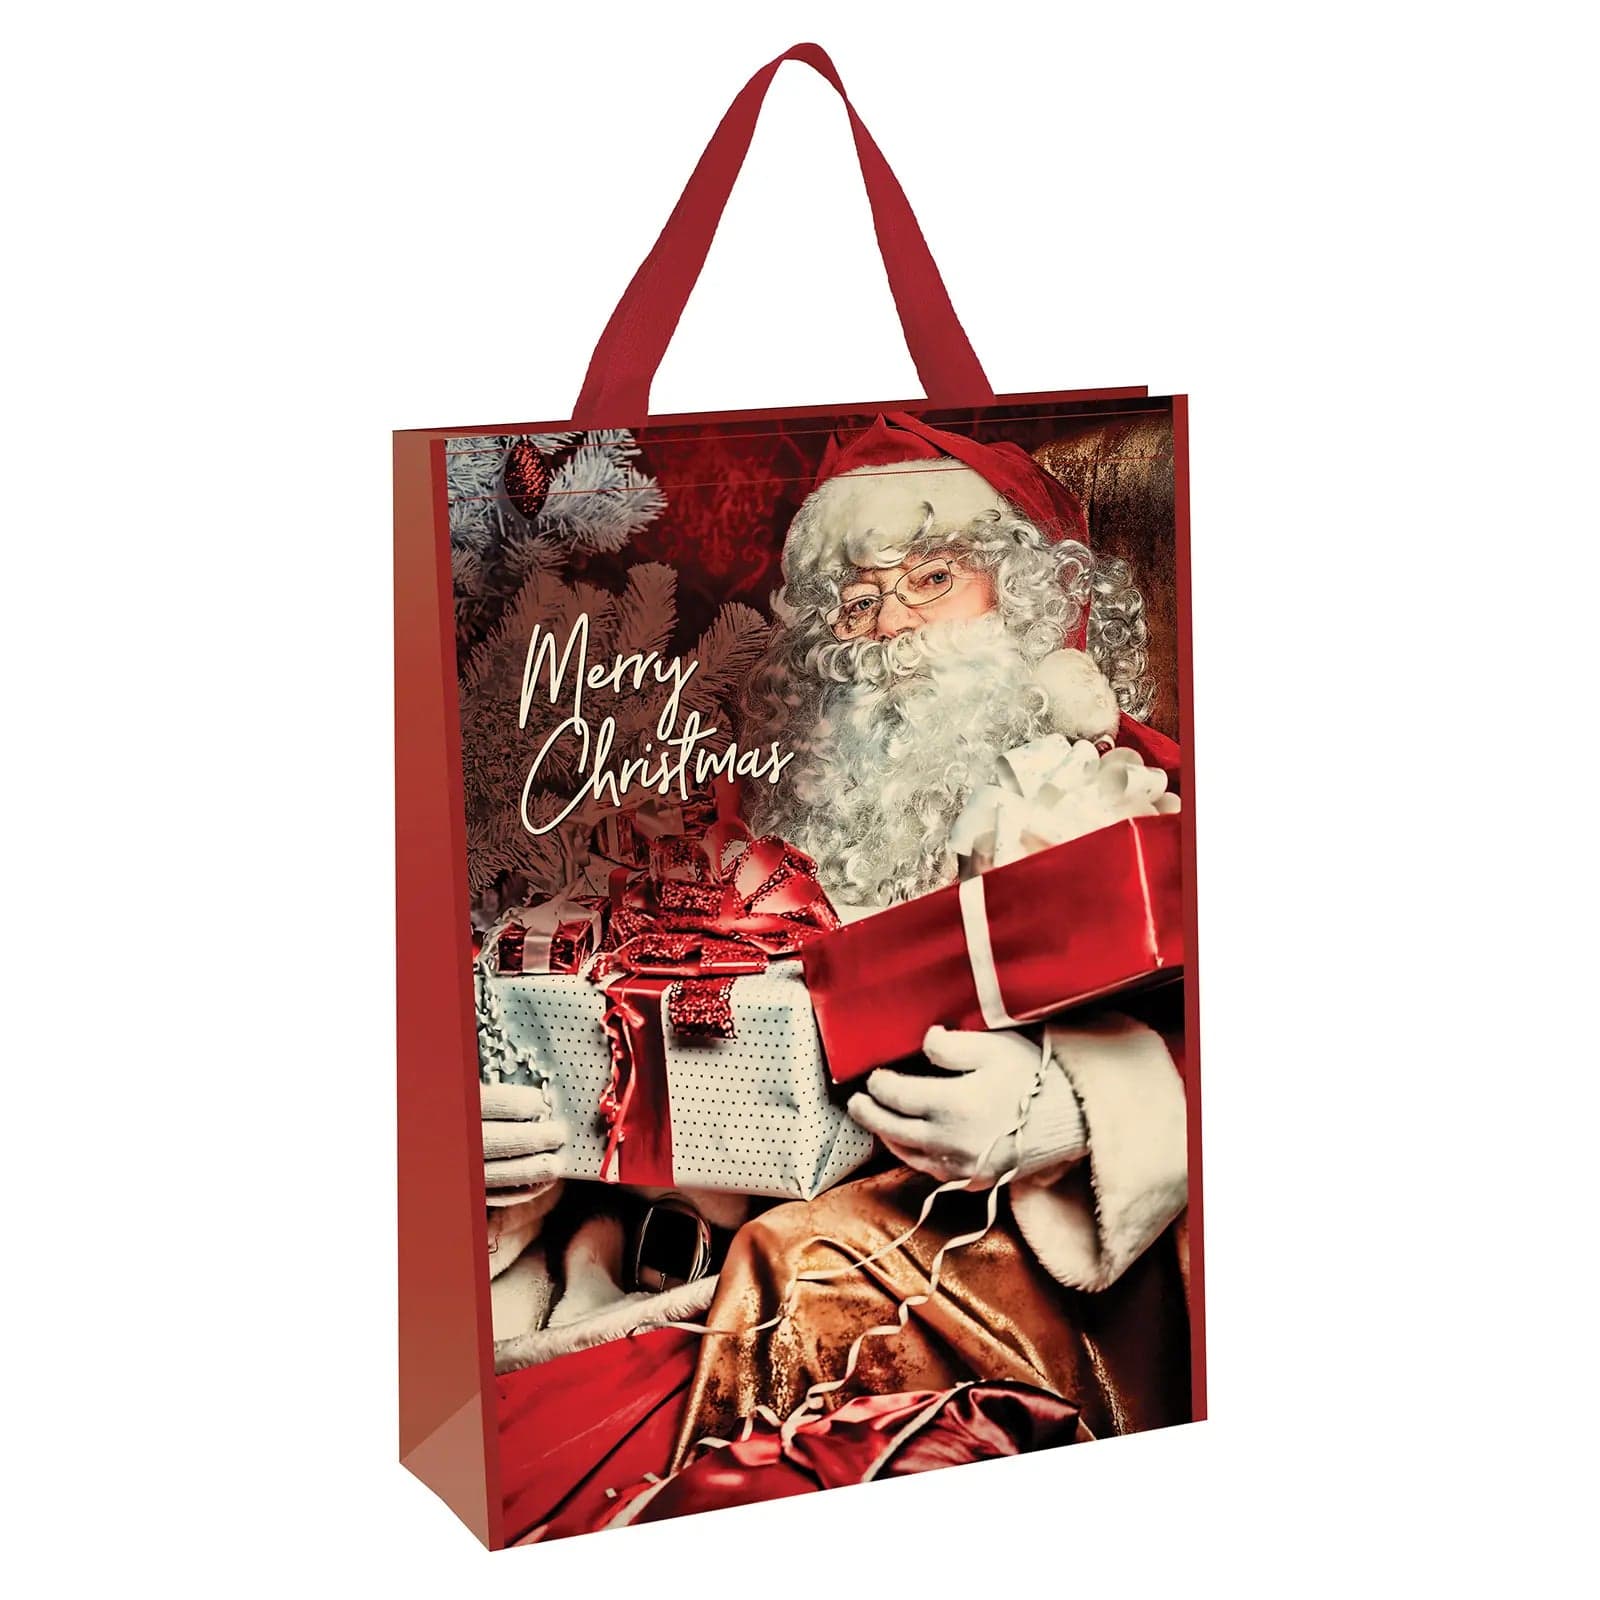 red Merry Christmas slogan Christmas bag featuring Santa Claus holding wrapped Christmas gifts beside Christmas tree